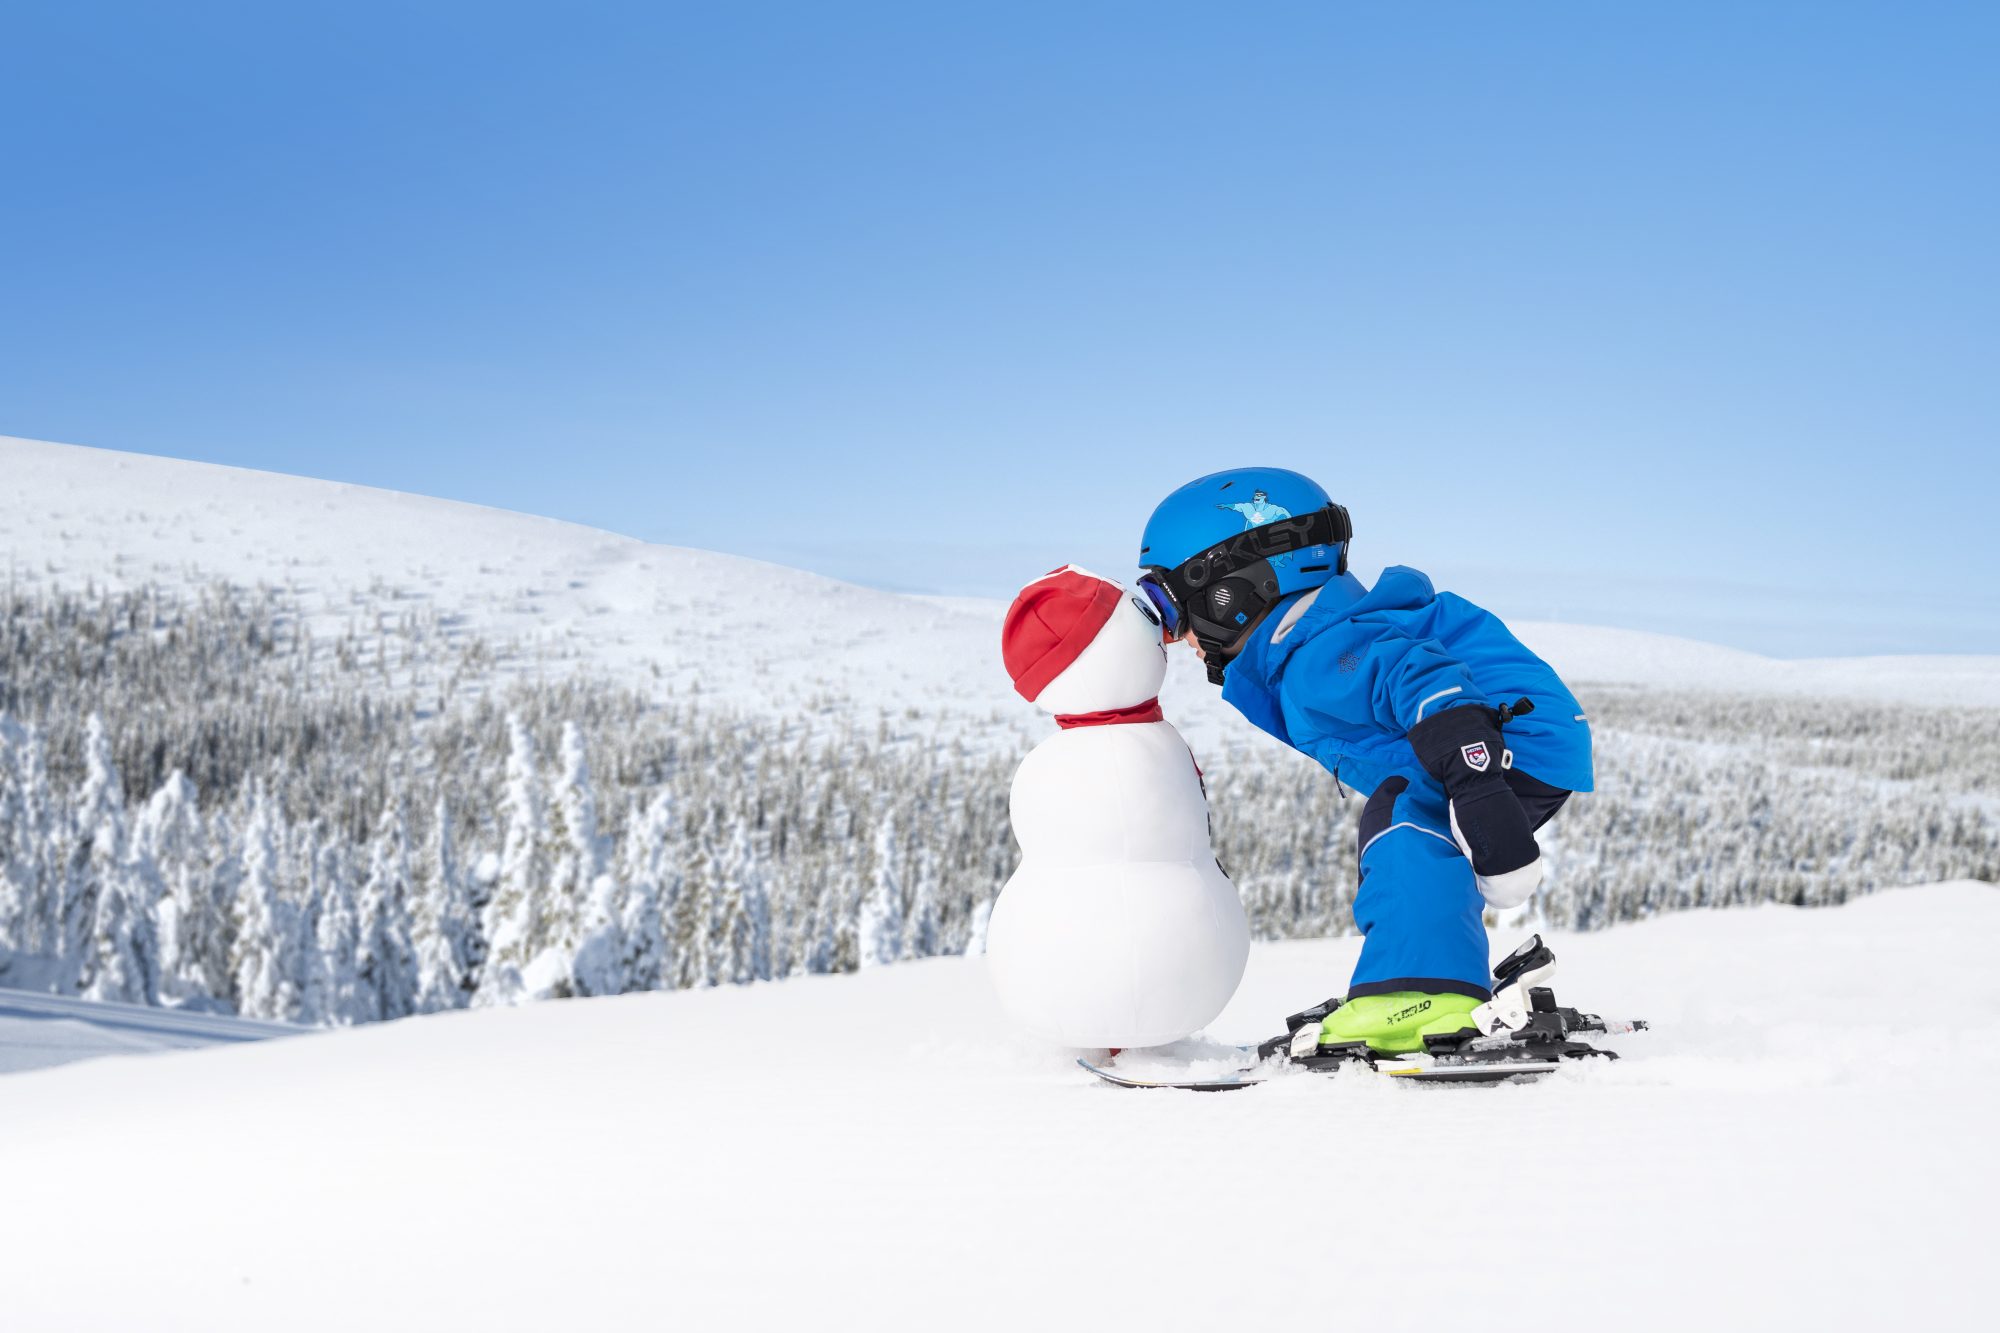 A kid kisses a snowman in the Valle of Salen. Photo Courtesy: SkiStaar. How can we envision ski resorts opening with social distancing for the 2020-21 ski season?